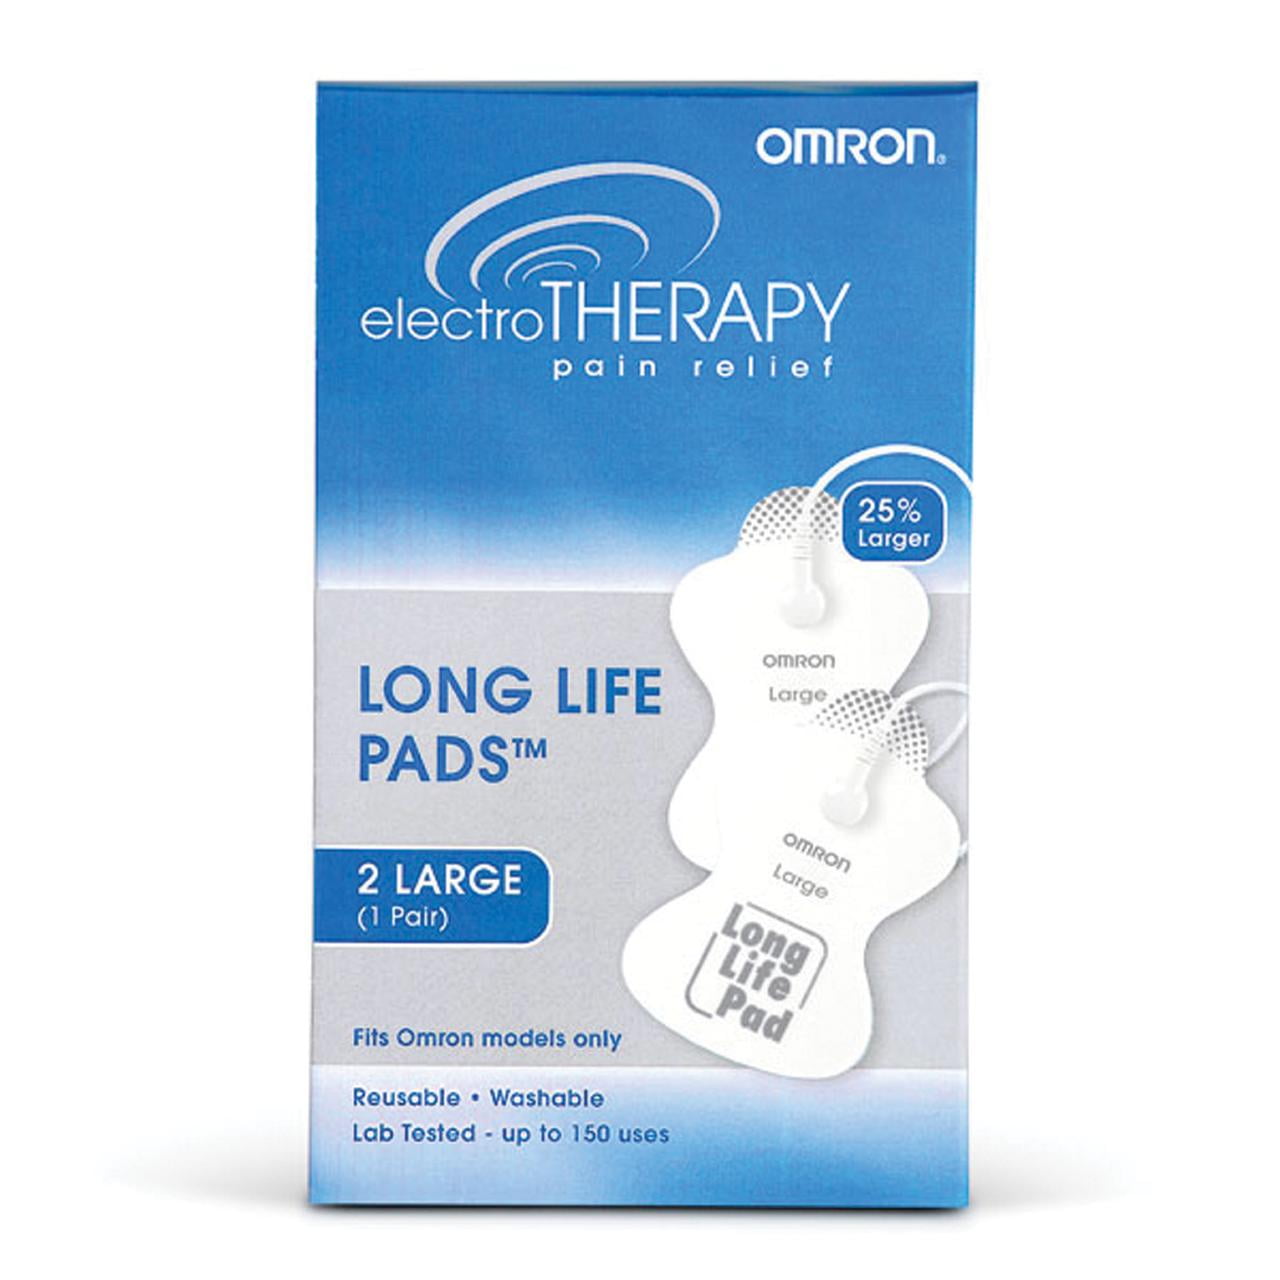 Omron Pocket Pain Pro TENS Unit (PM400), Powerful Drug-free Pain Relief